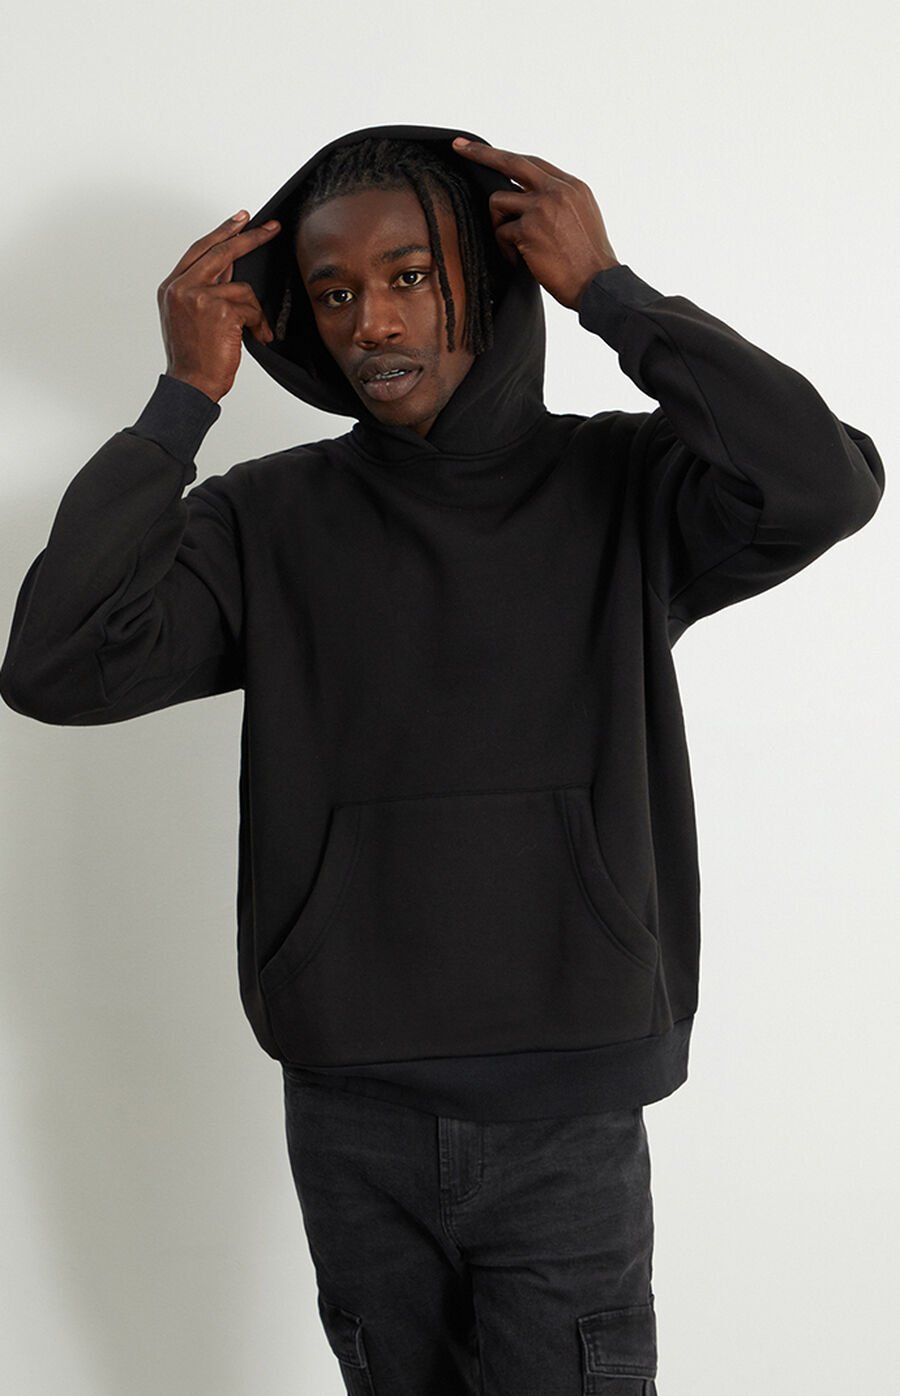 PacSun Black Solid Hoodie | PacSun